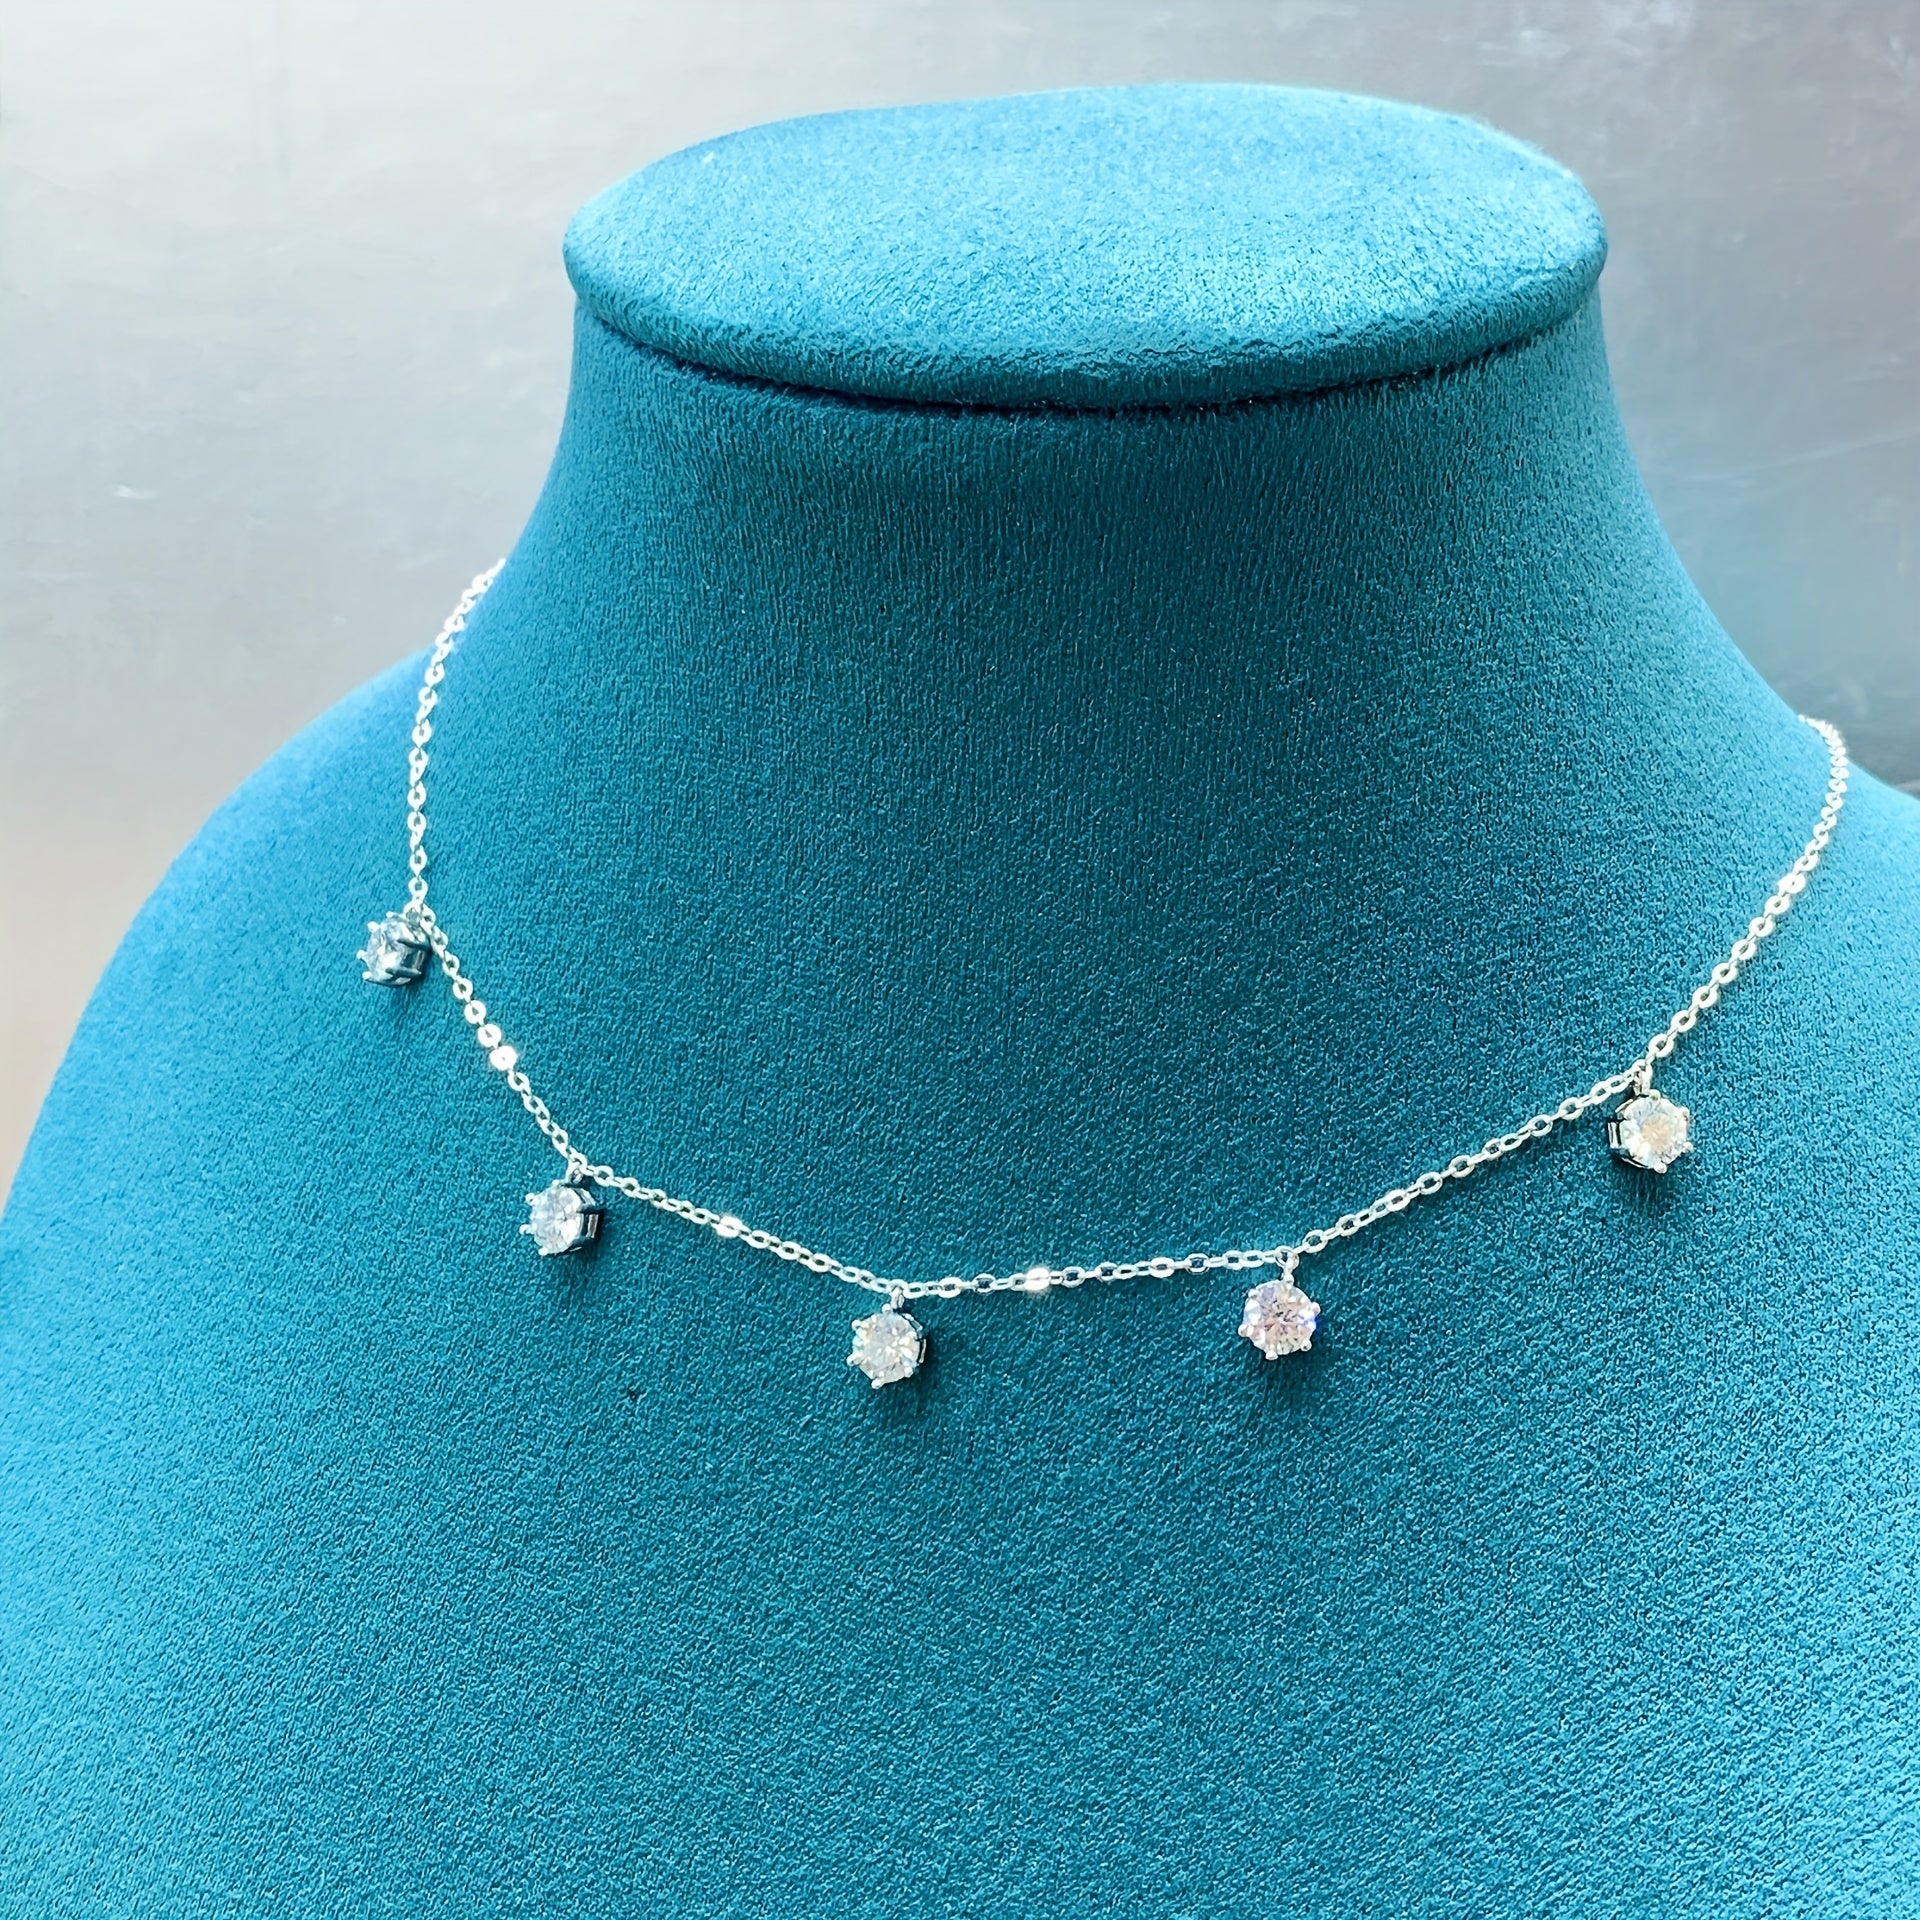 Starry Luxury Necklace - 925 Sterling Silver Moissanite Clavicle Chain for Women, Perfect Gift for Birthday, Anniversary, Proposal, Engagement, and Wedding